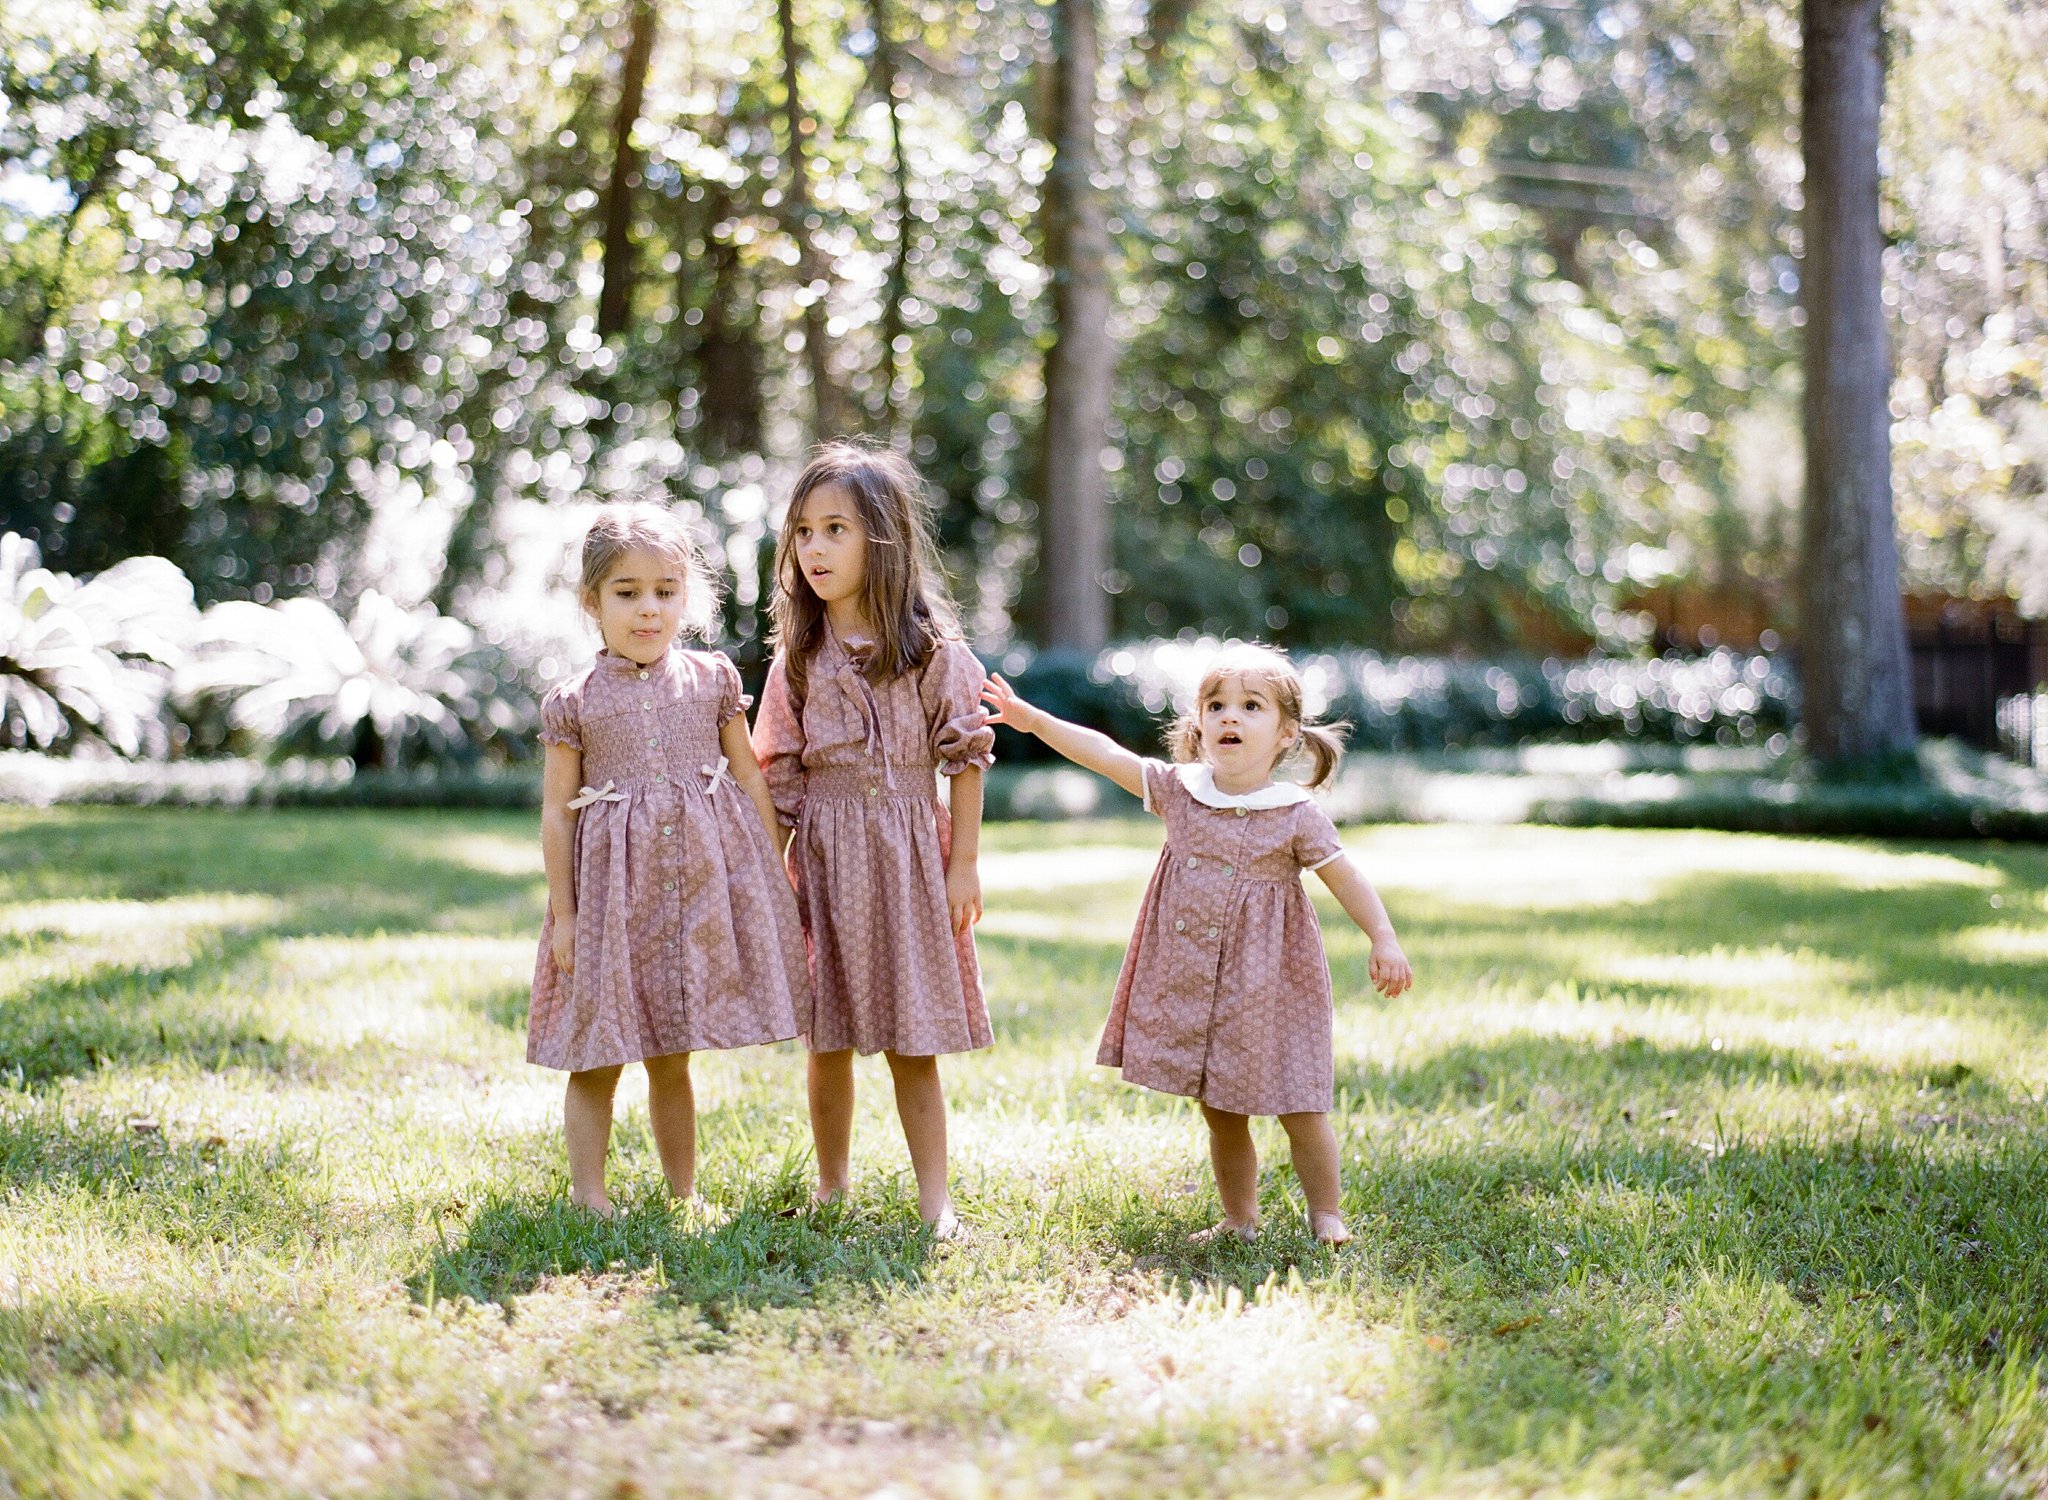 tallahassee family photographer shannon griffin photography_0035.jpg